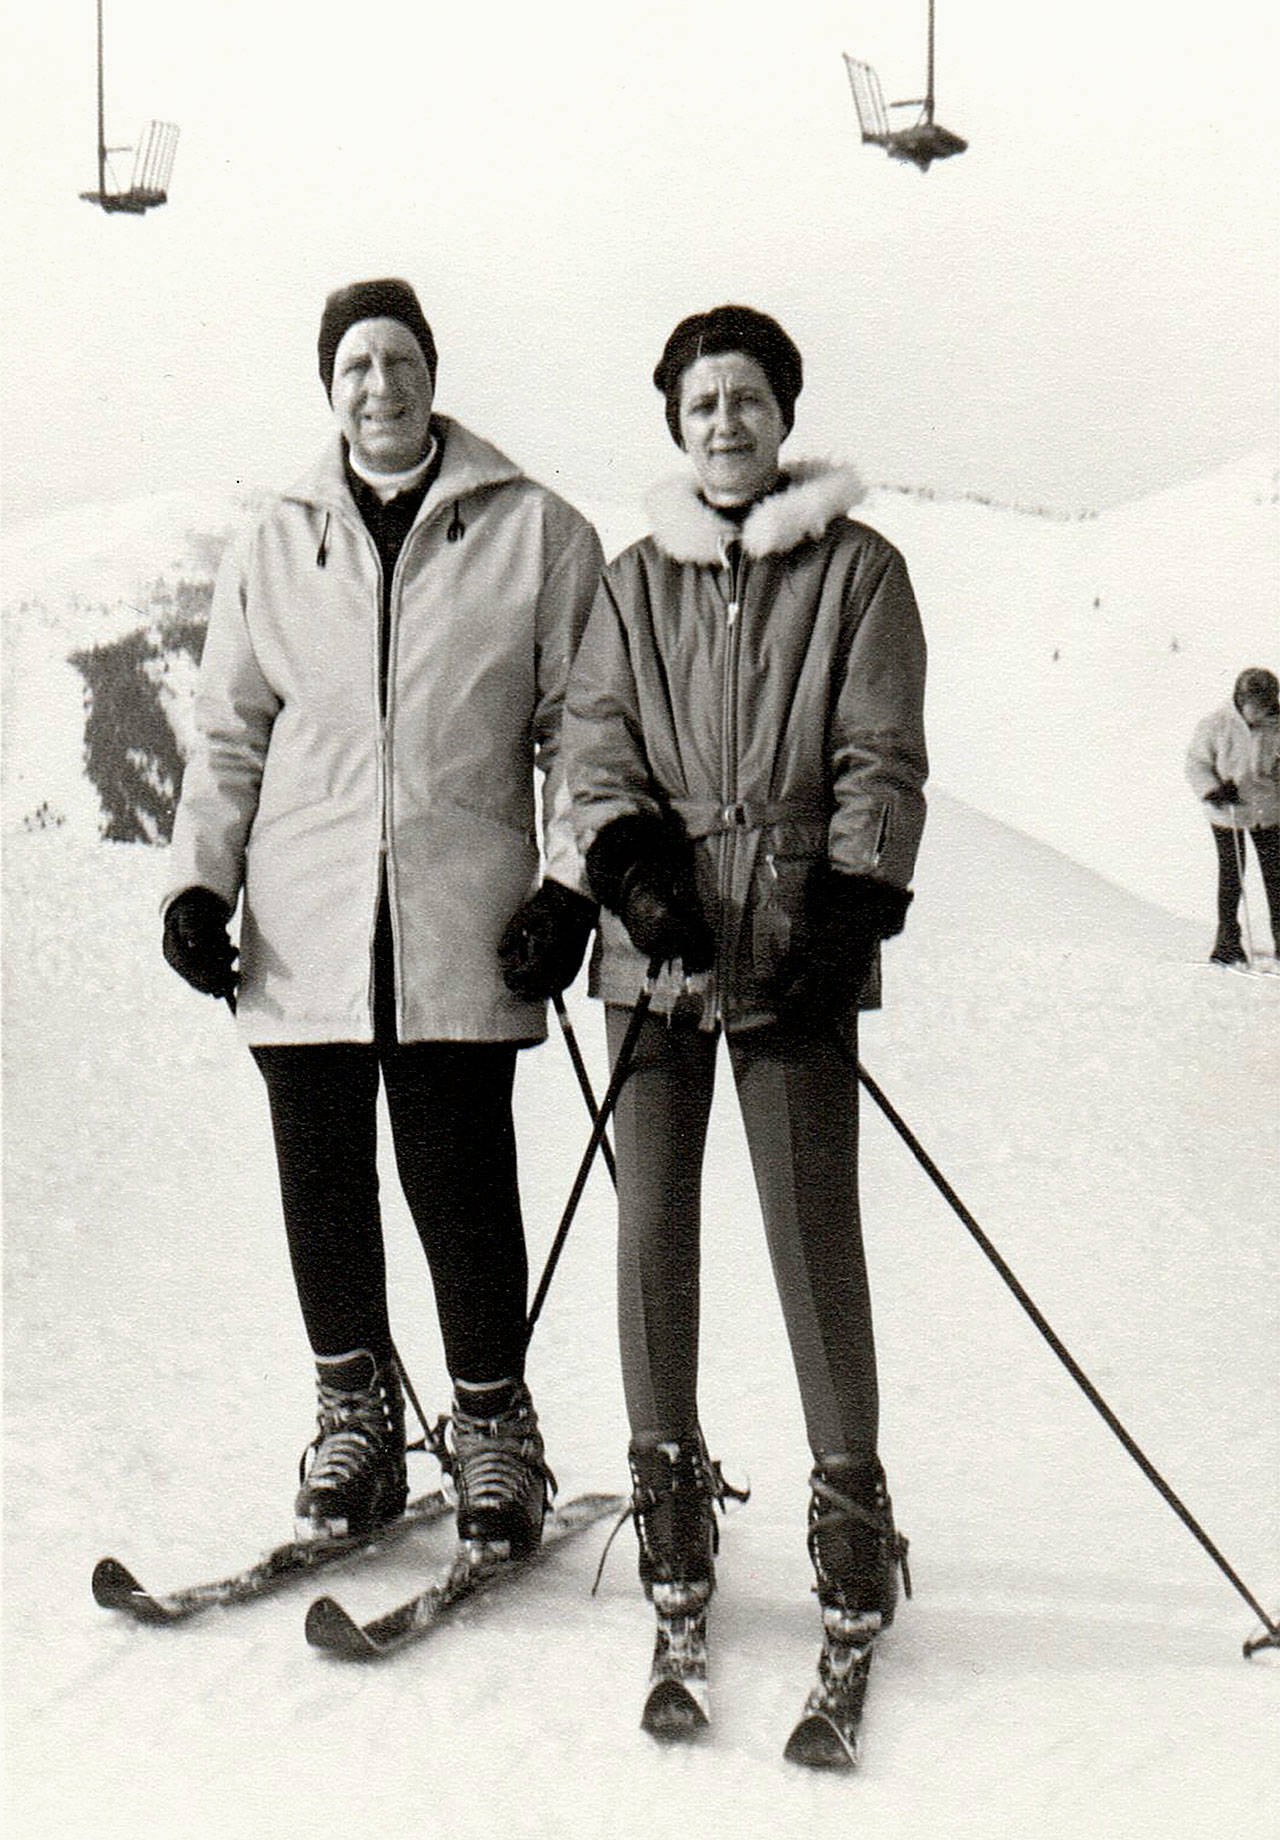 Elizabeth Ruth Wallace on skis in Sun Valley, Idaho, in 1966 with her husband, pharmacist Bryan Wallace. Since her death in 2016, the Elizabeth Ruth Wallace Living Trust has donated millions of dollars to nonprofit groups, parks and other organizations. (Courtesy Cheri Ryan)